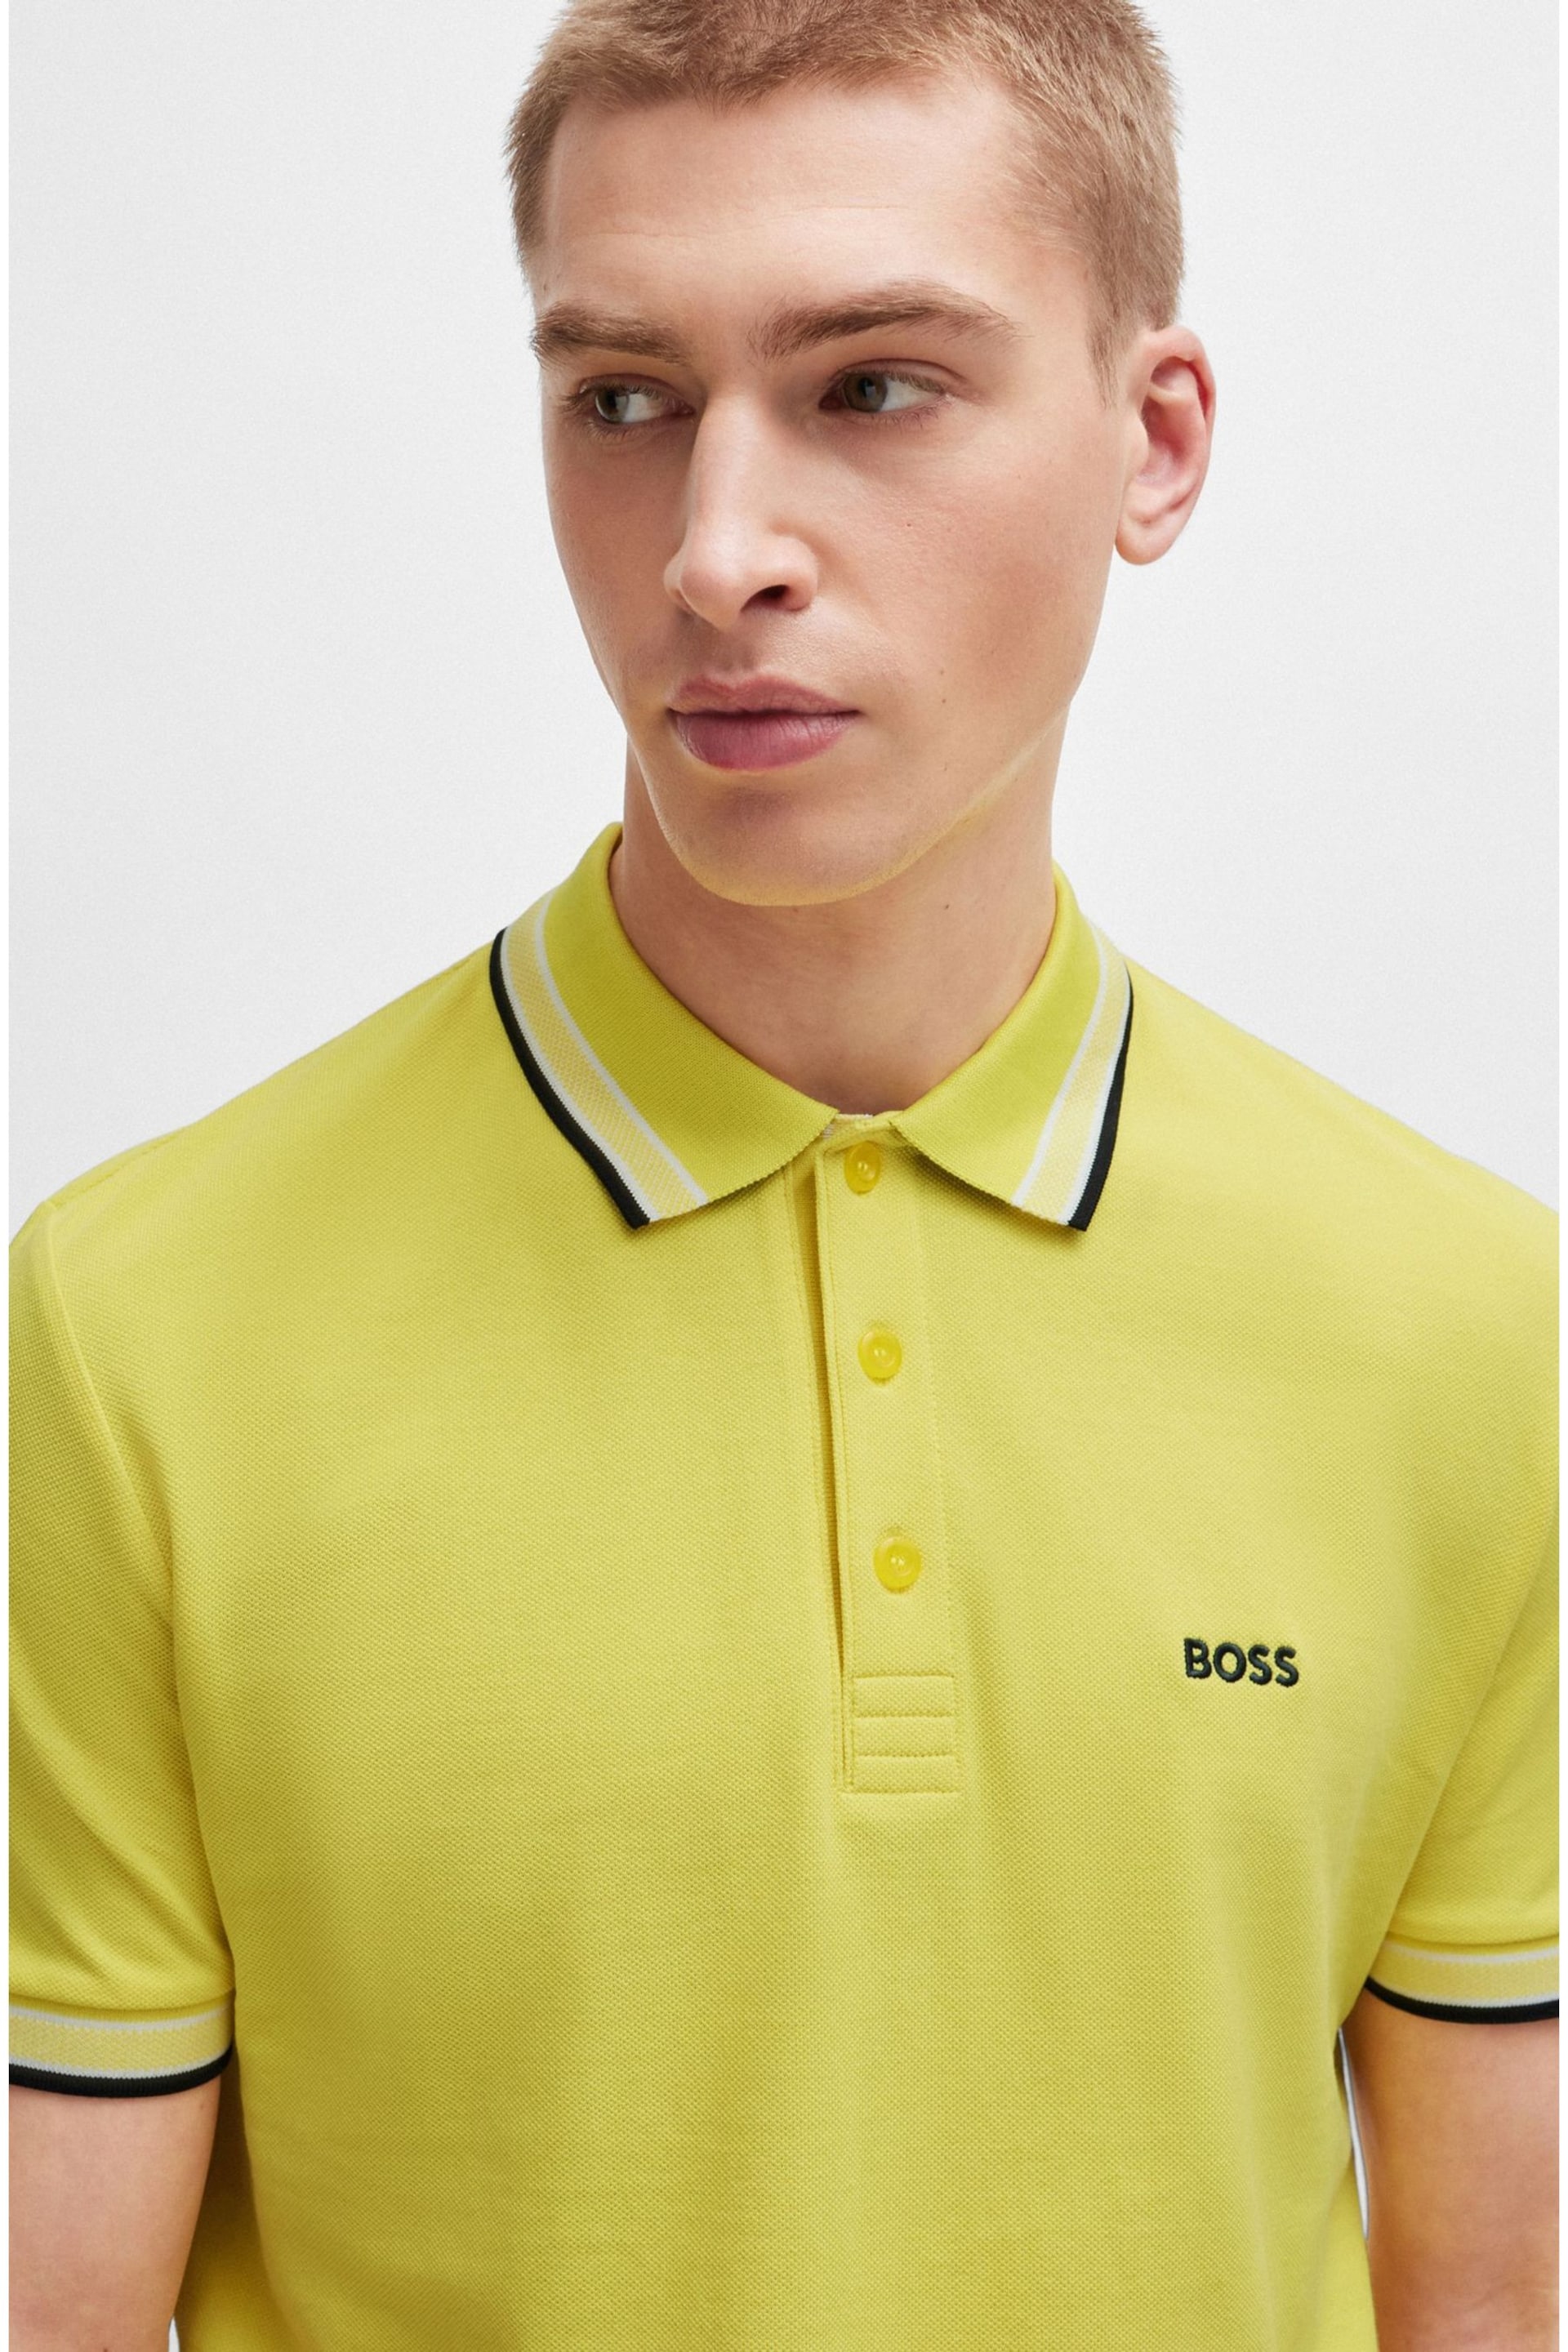 BOSS Yellow Cotton Polo Shirt With Contrast Logo Details - Image 1 of 5